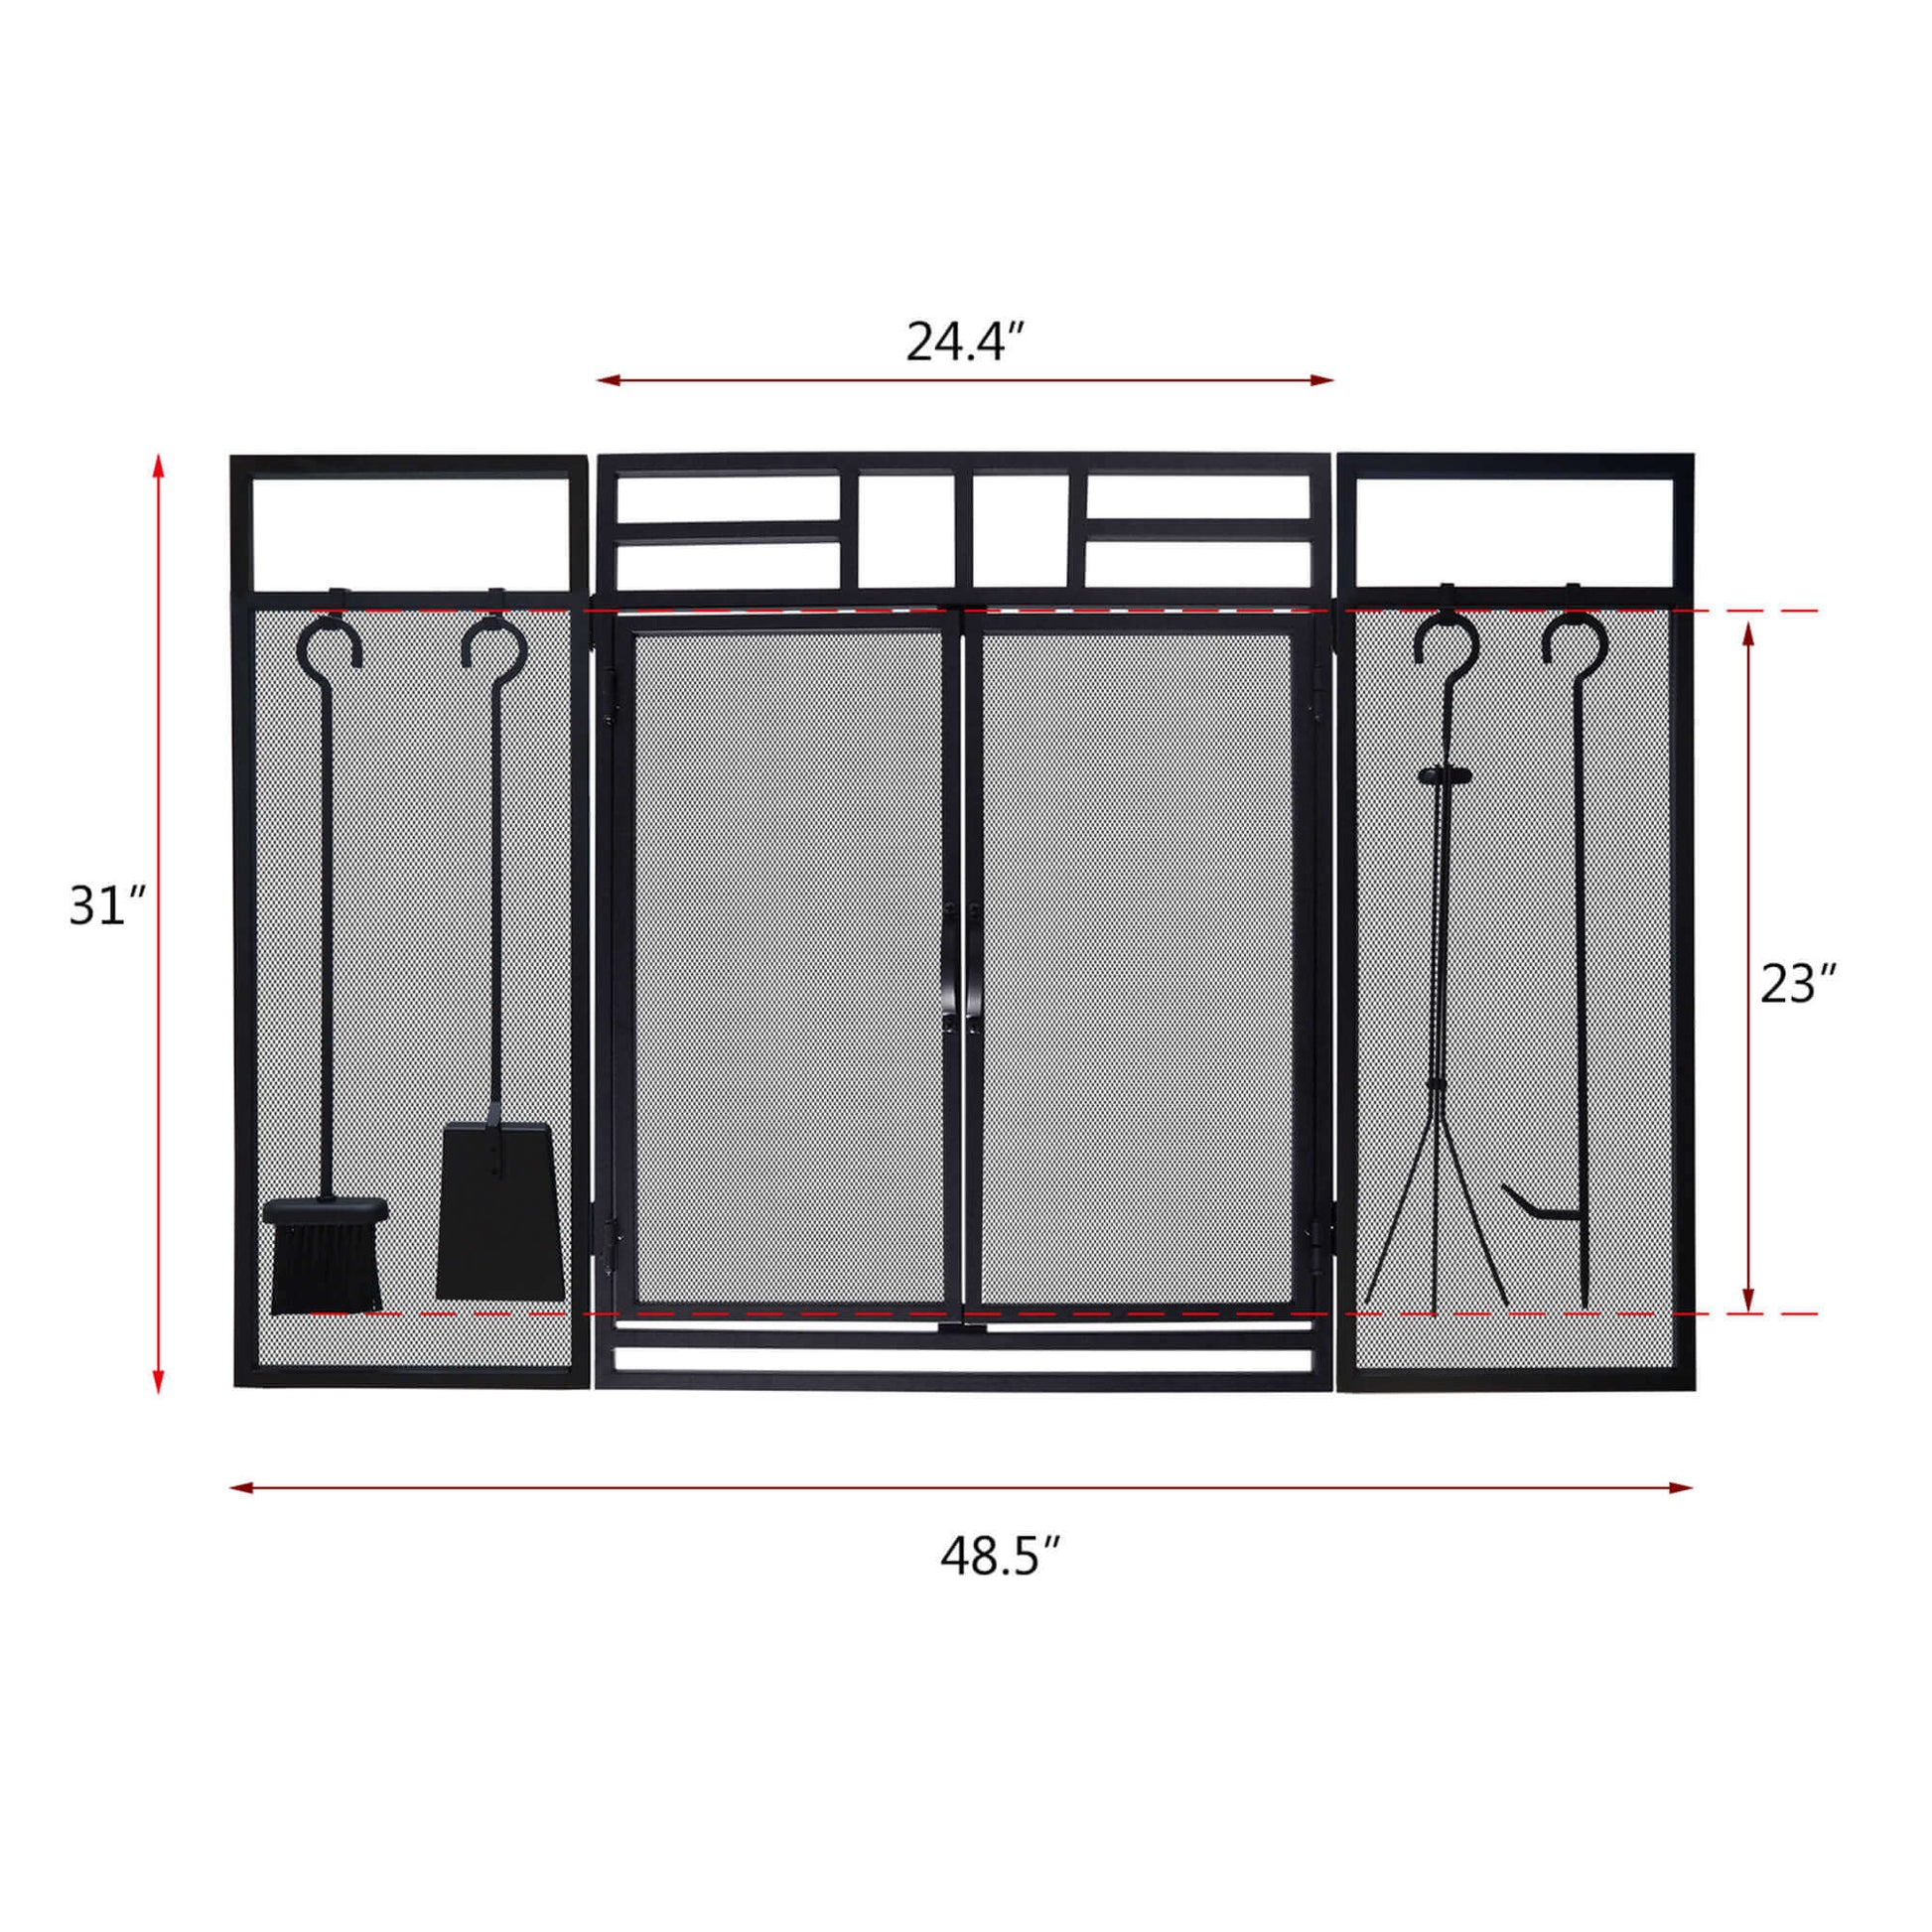 Fireplace Screen Tool Sets / Large Steel Mesh Fireplace Sreen with Doors / Solid Wrought Iron Metal Fire Place Panels